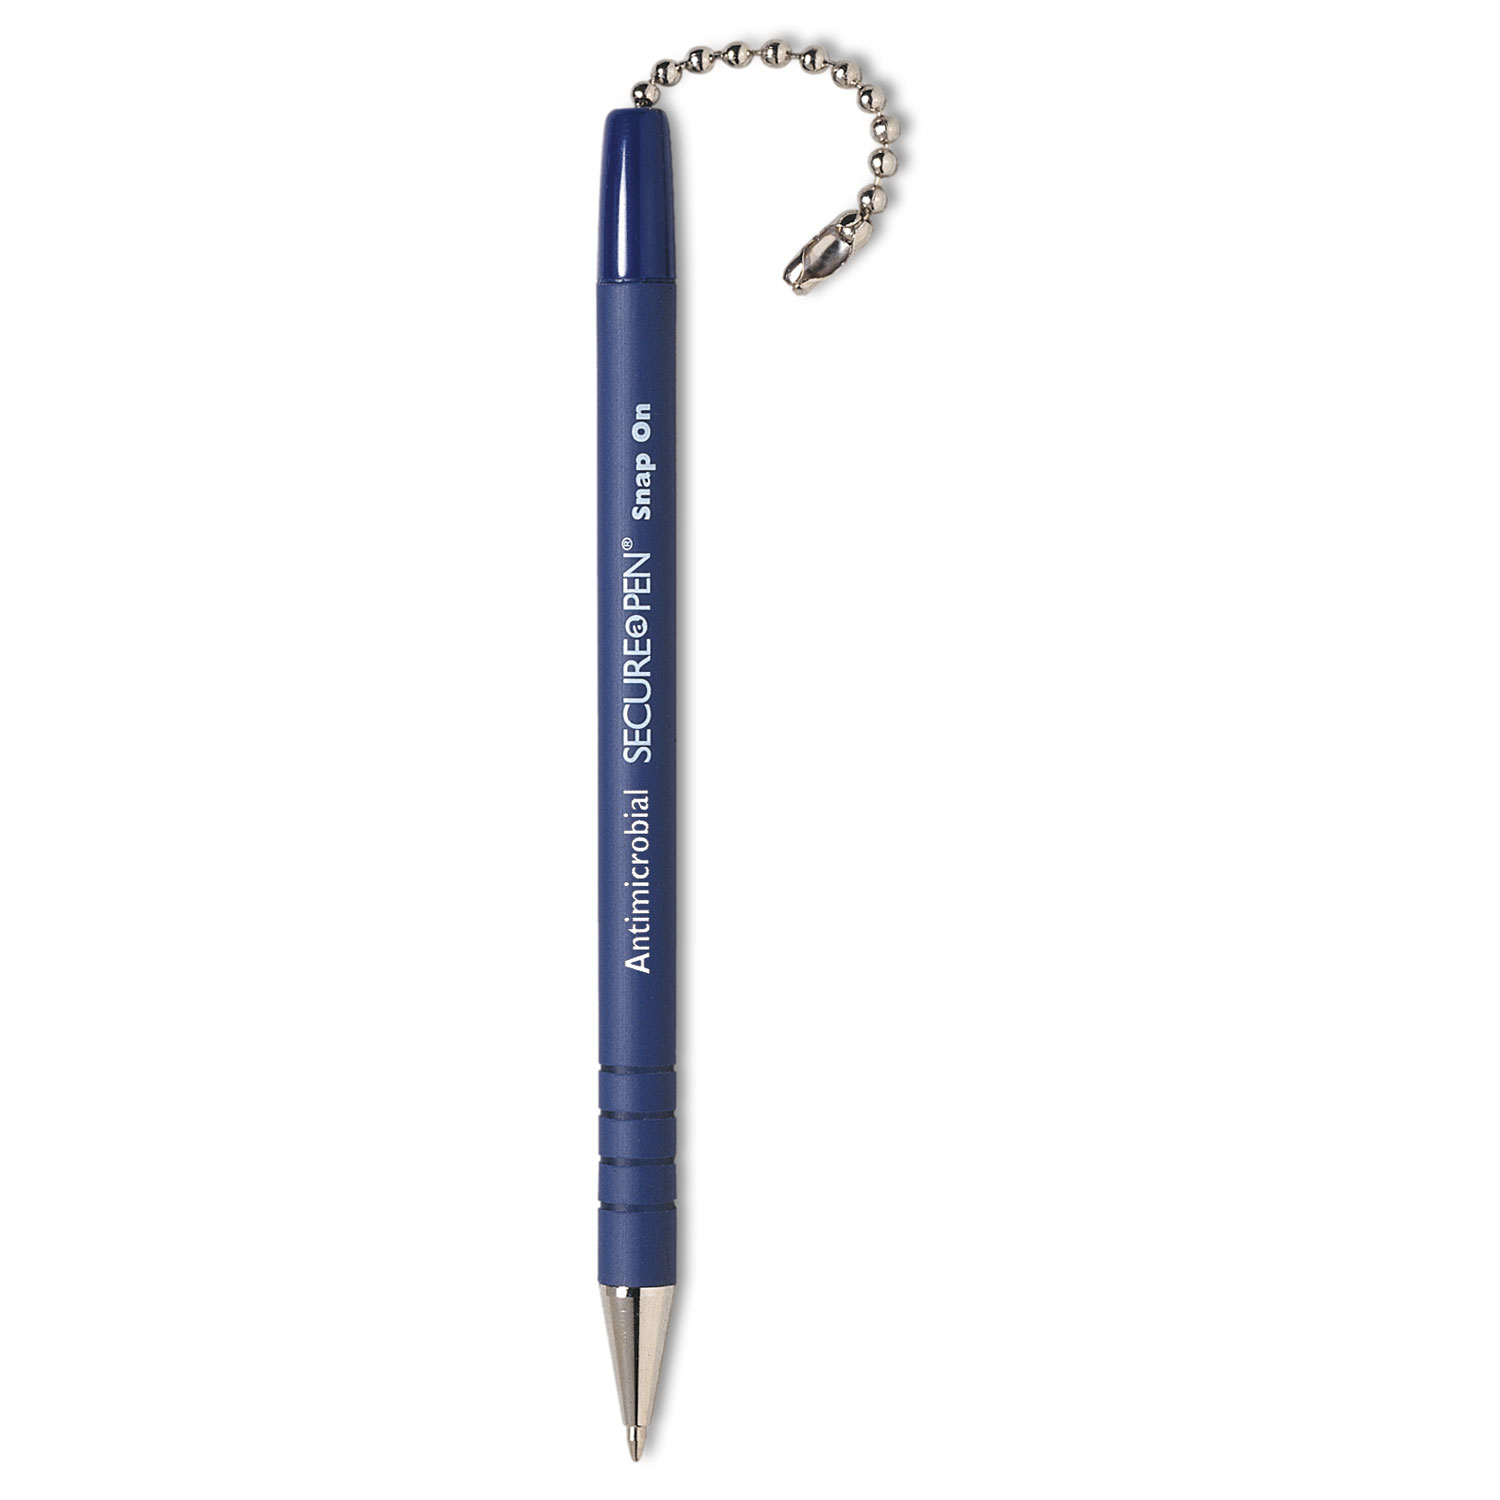 Secure-A-Pen Replacement Ballpoint Antimicrobial Counter Pen, Blue Ink, Medium